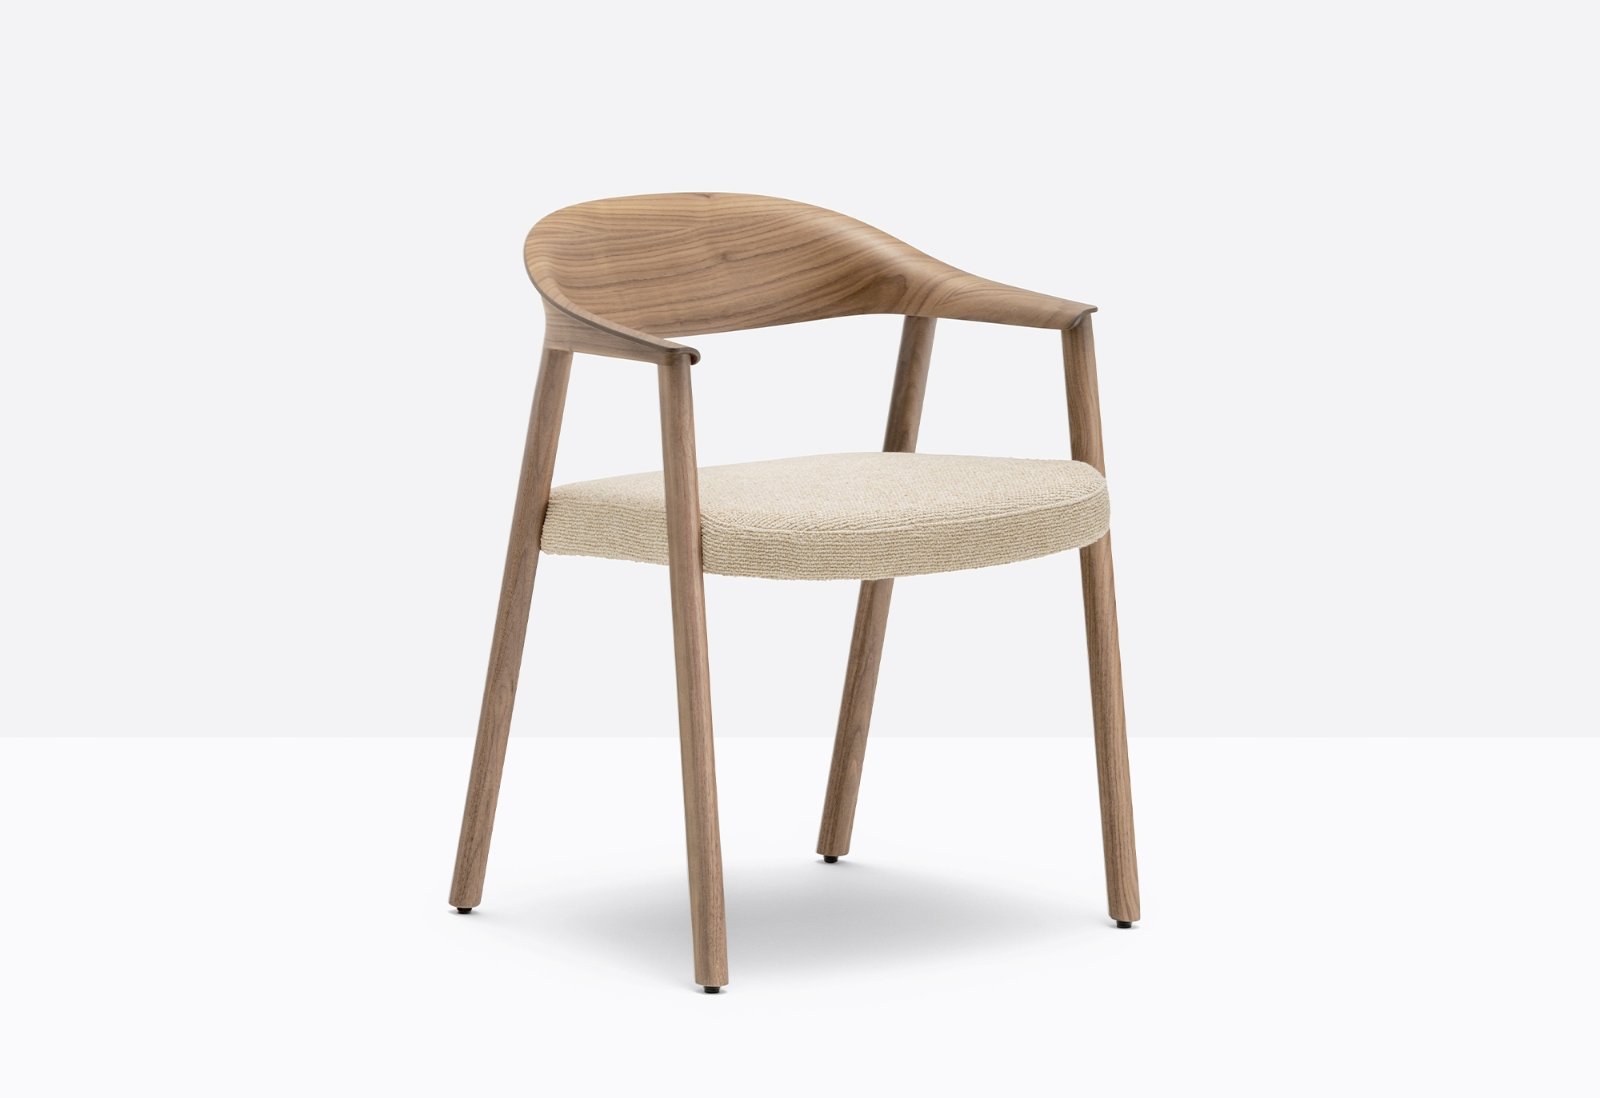 Hera 2865 Chair from Pedrali, designed by Patrick Jouin